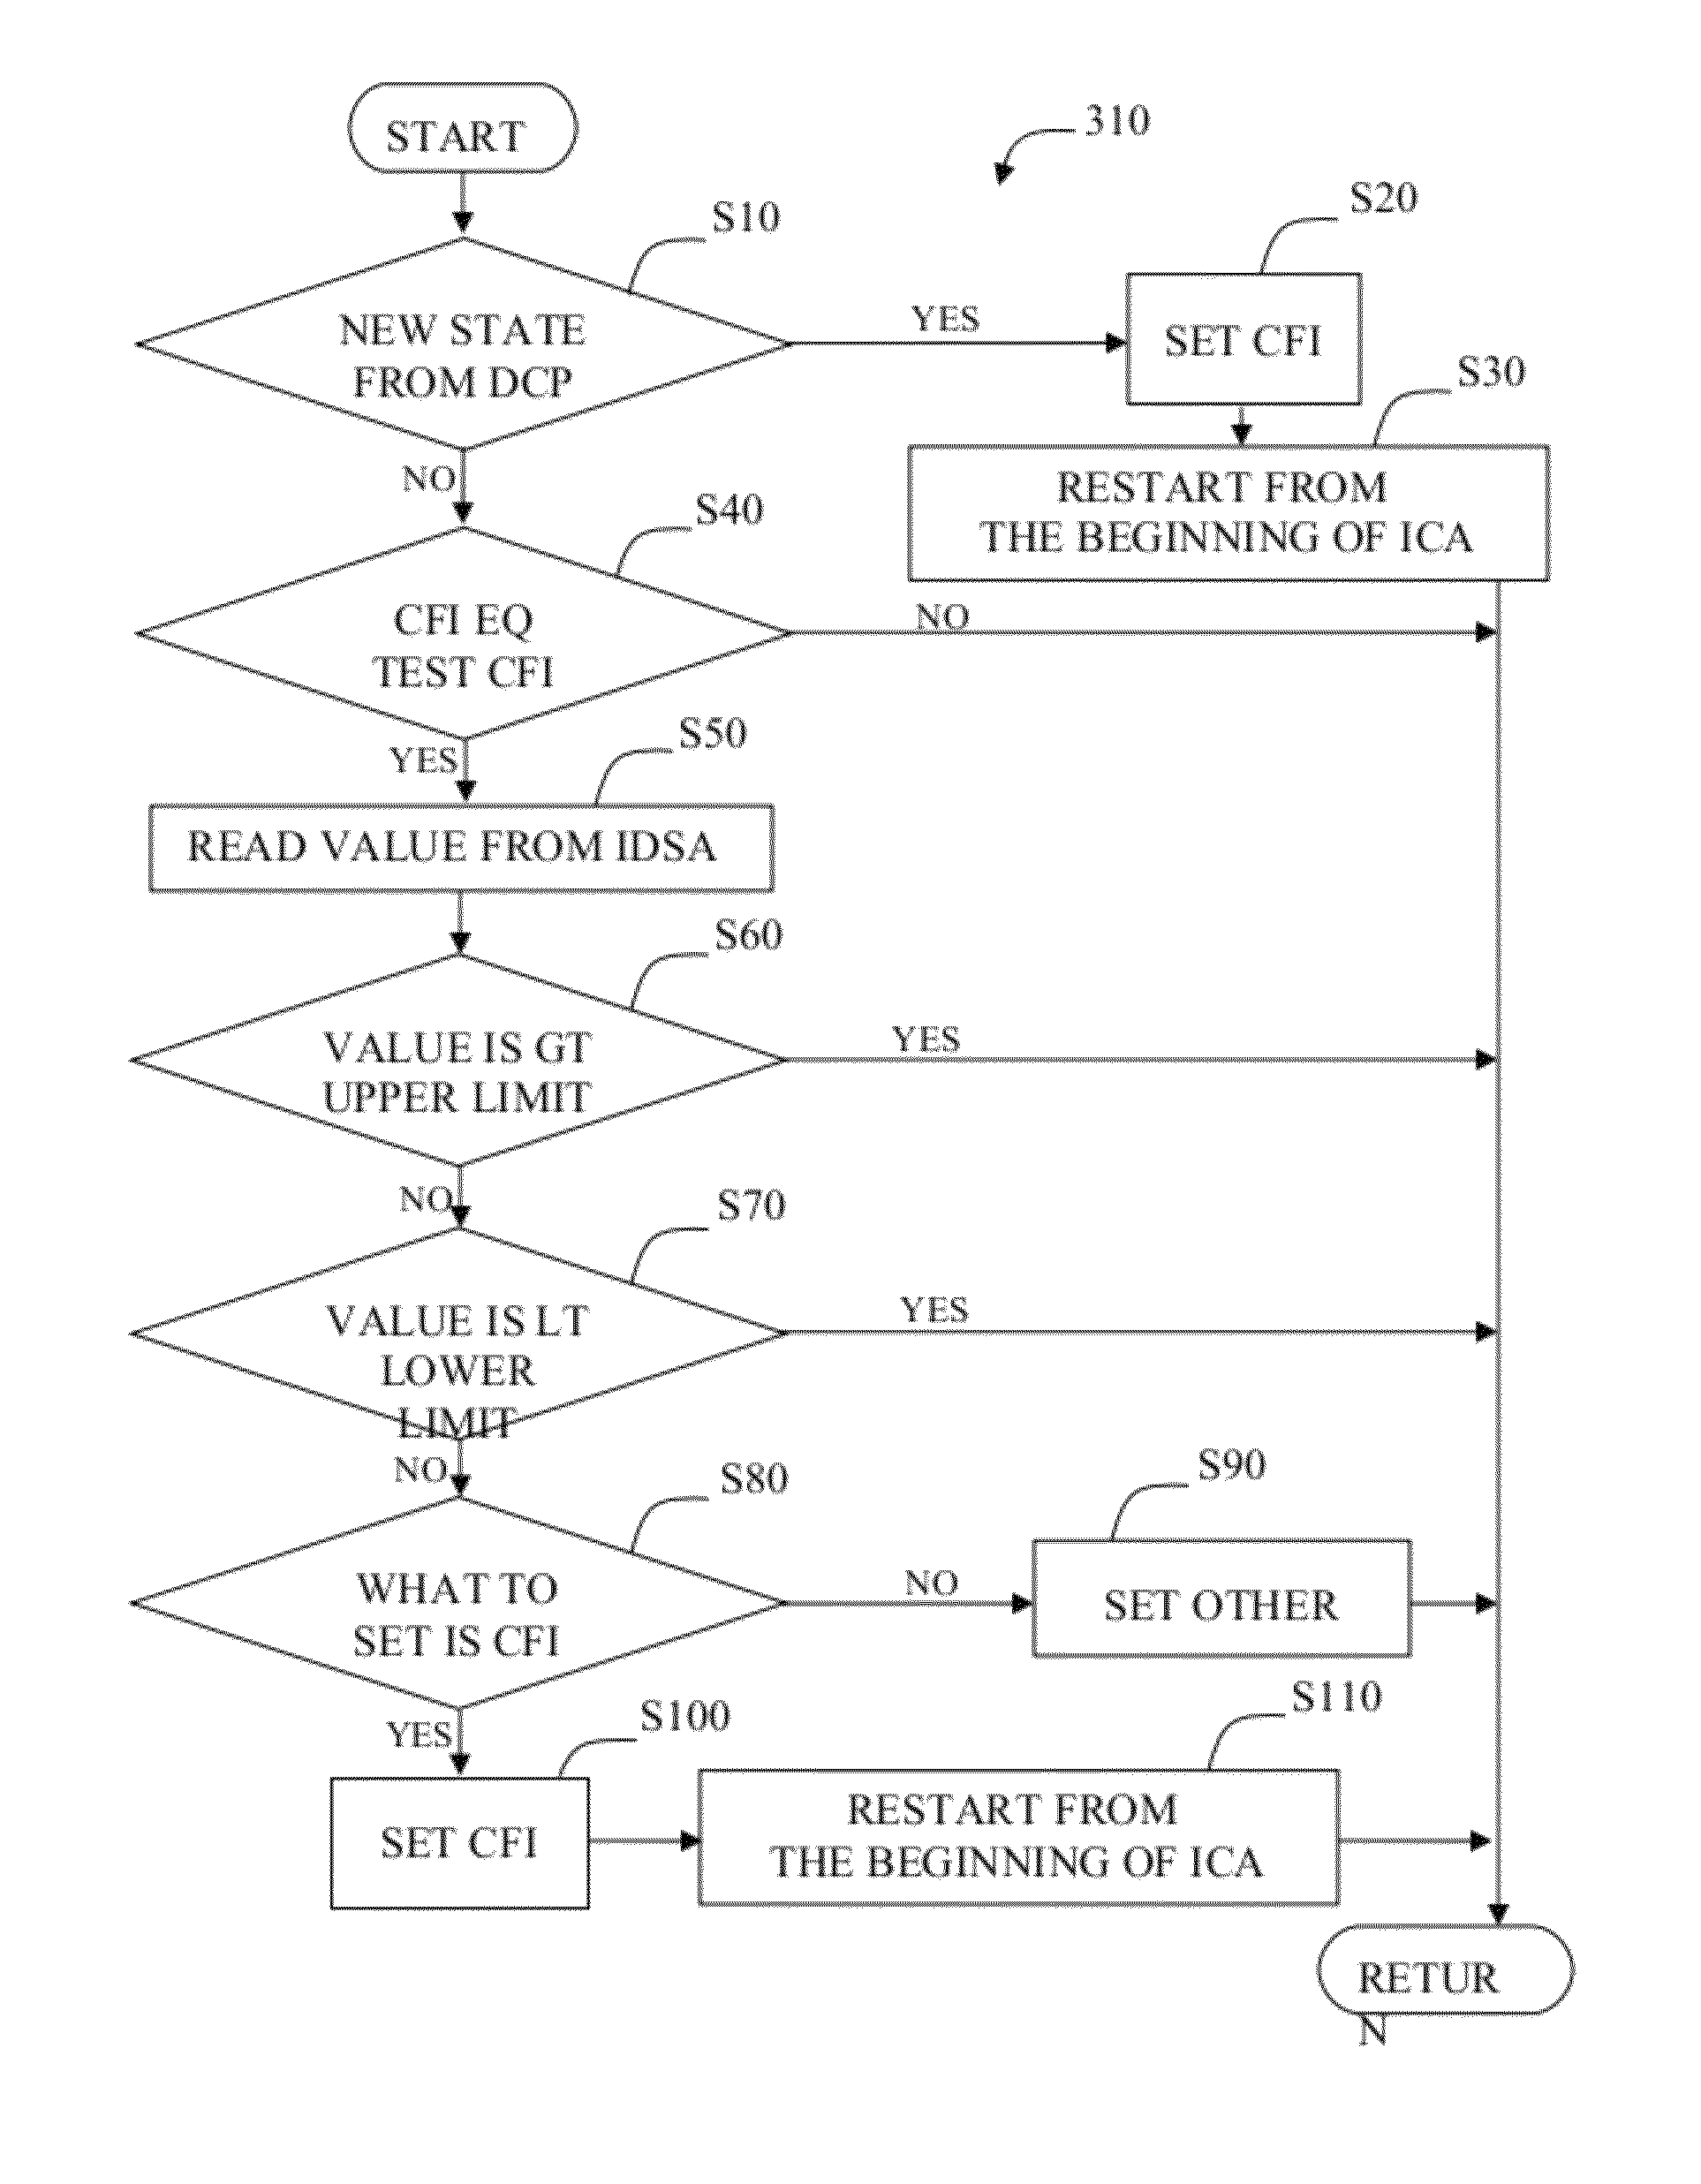 Integrated circuit signal generation device